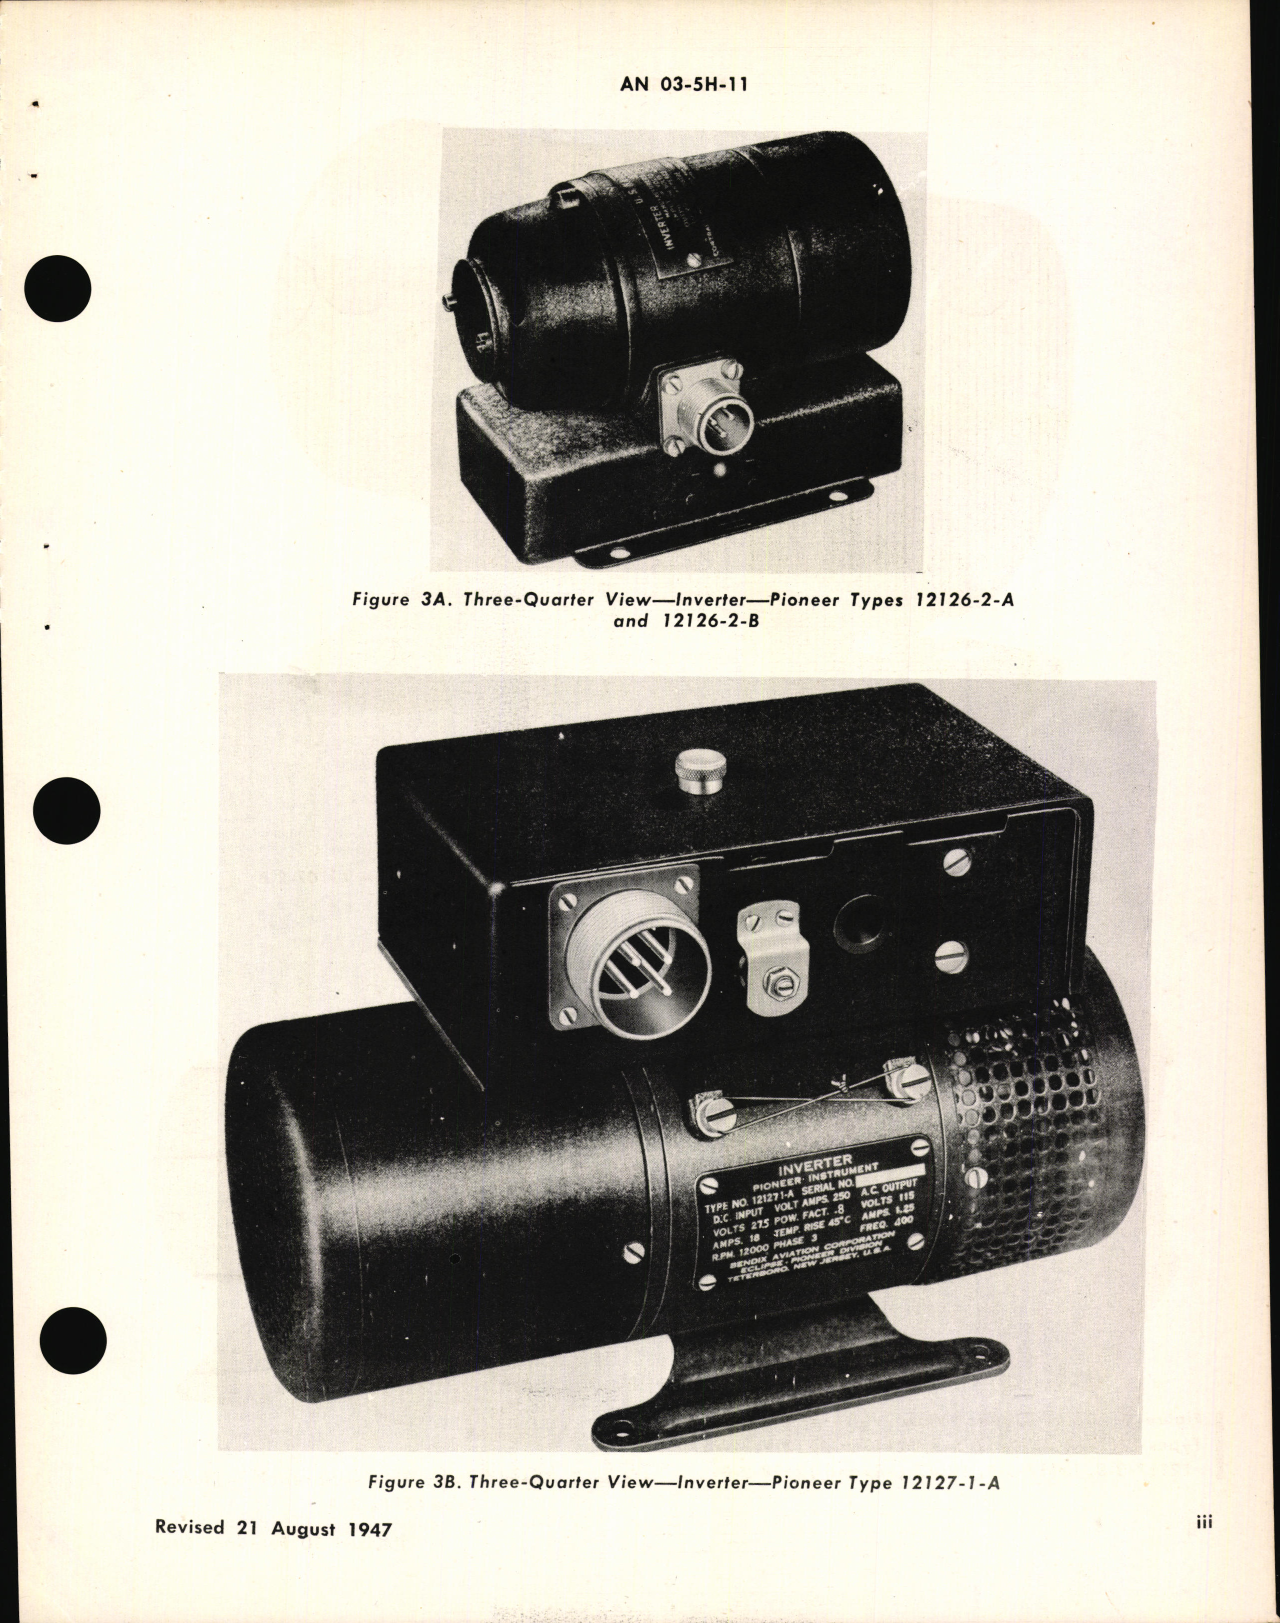 Sample page 5 from AirCorps Library document: Operation, Service & Overhaul Instructions with Parts Catalog for Pioneer Inverters